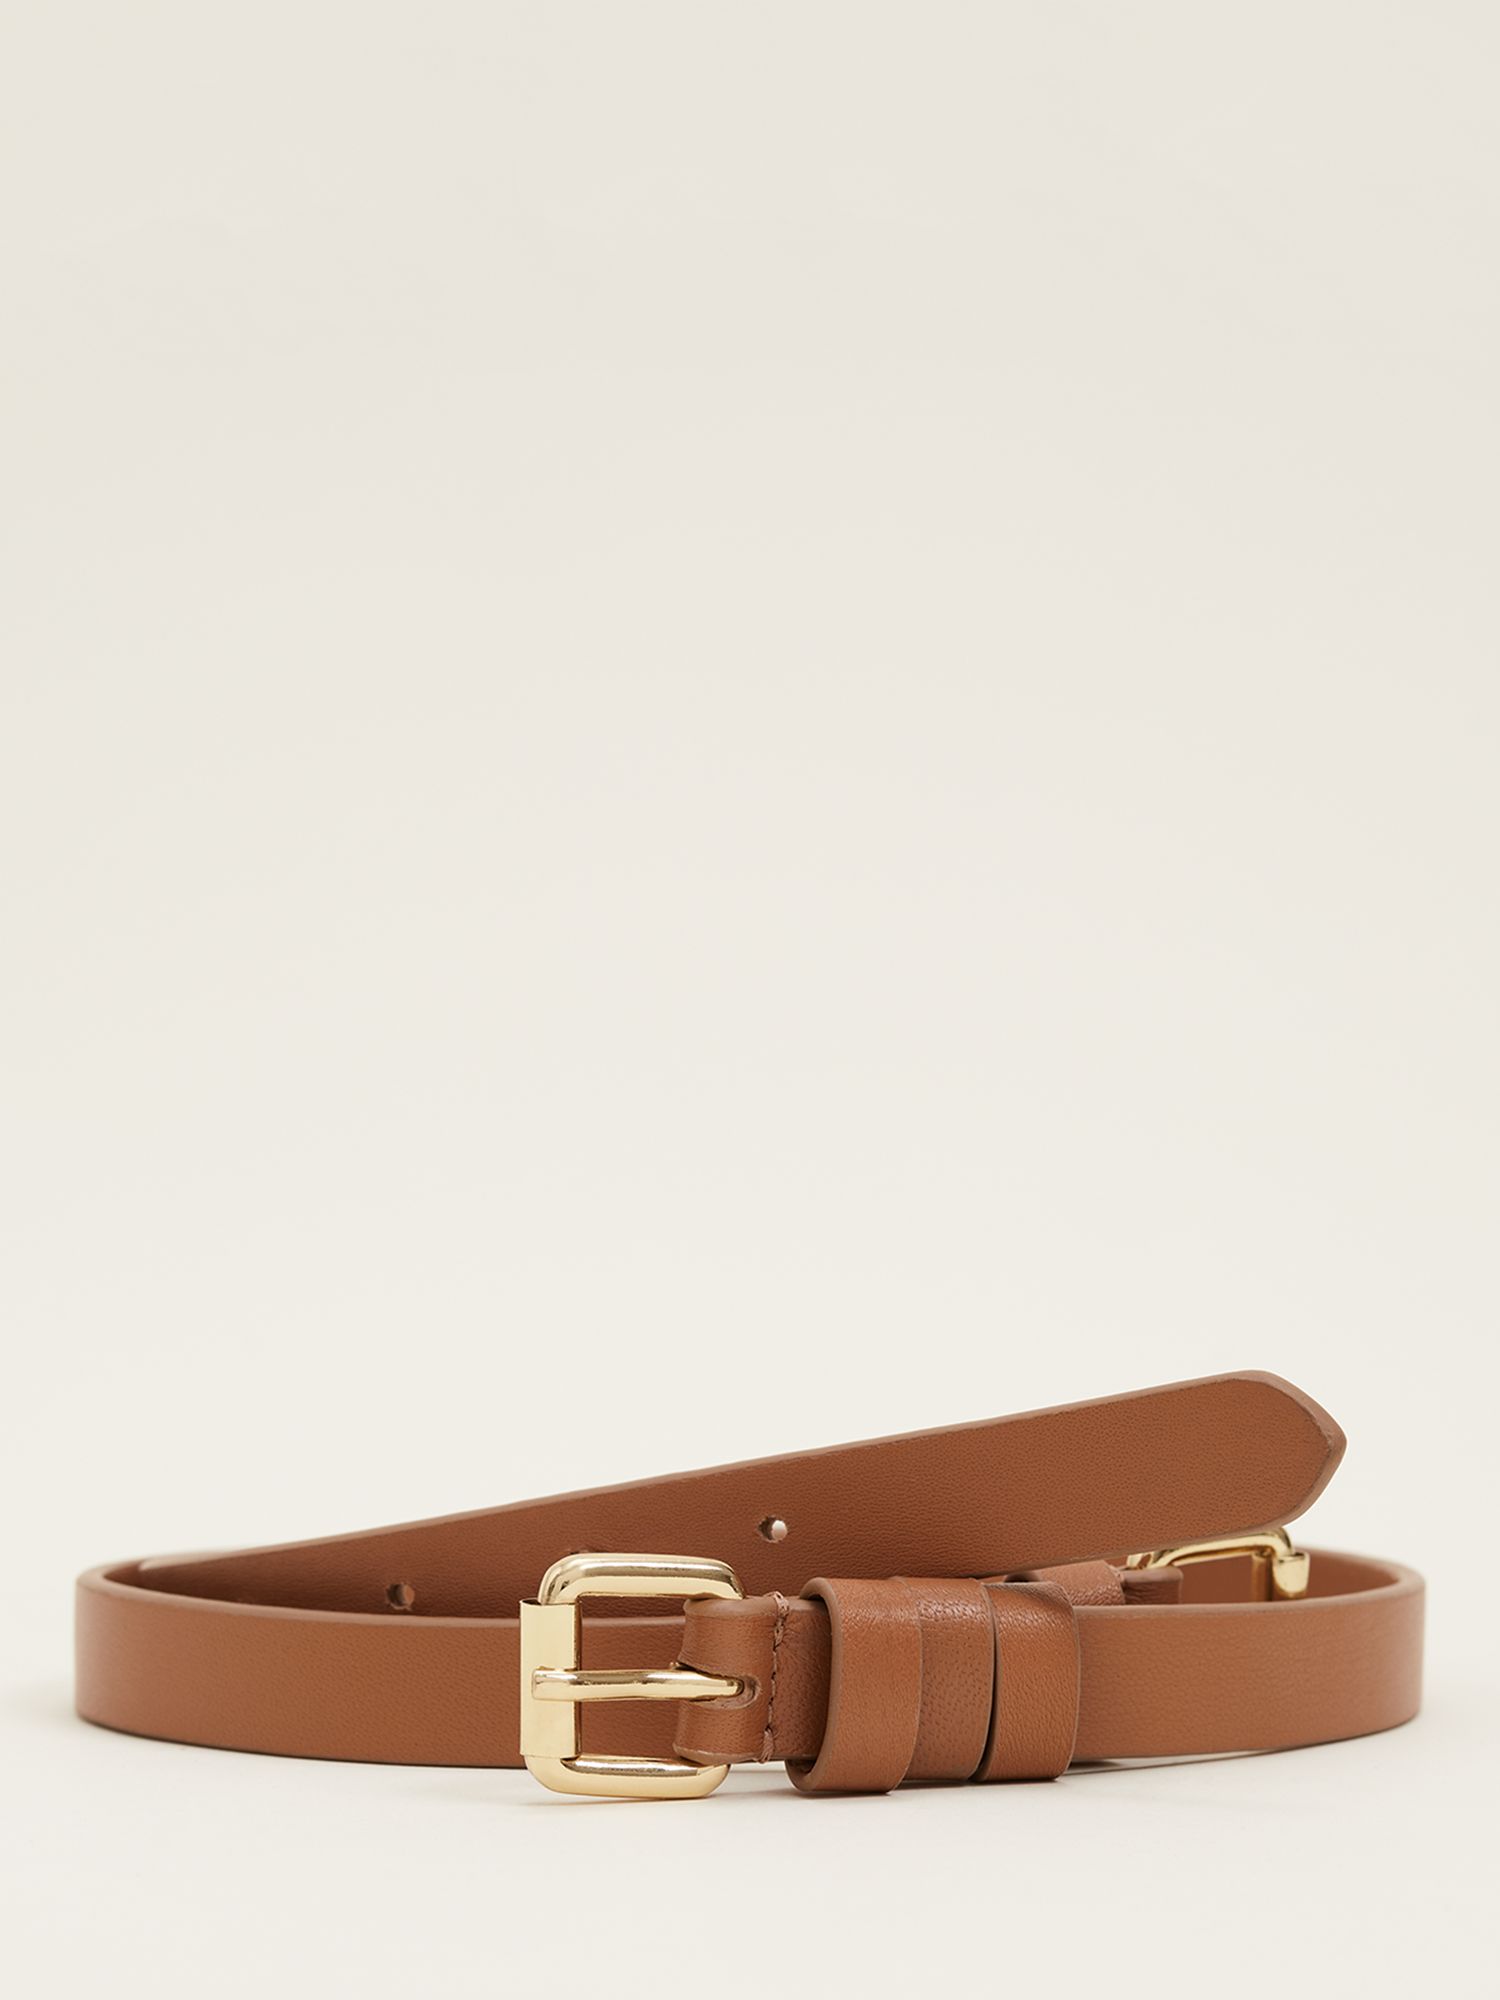 Phase Eight Double Buckle Slim Leather Belt, Tan at John Lewis & Partners